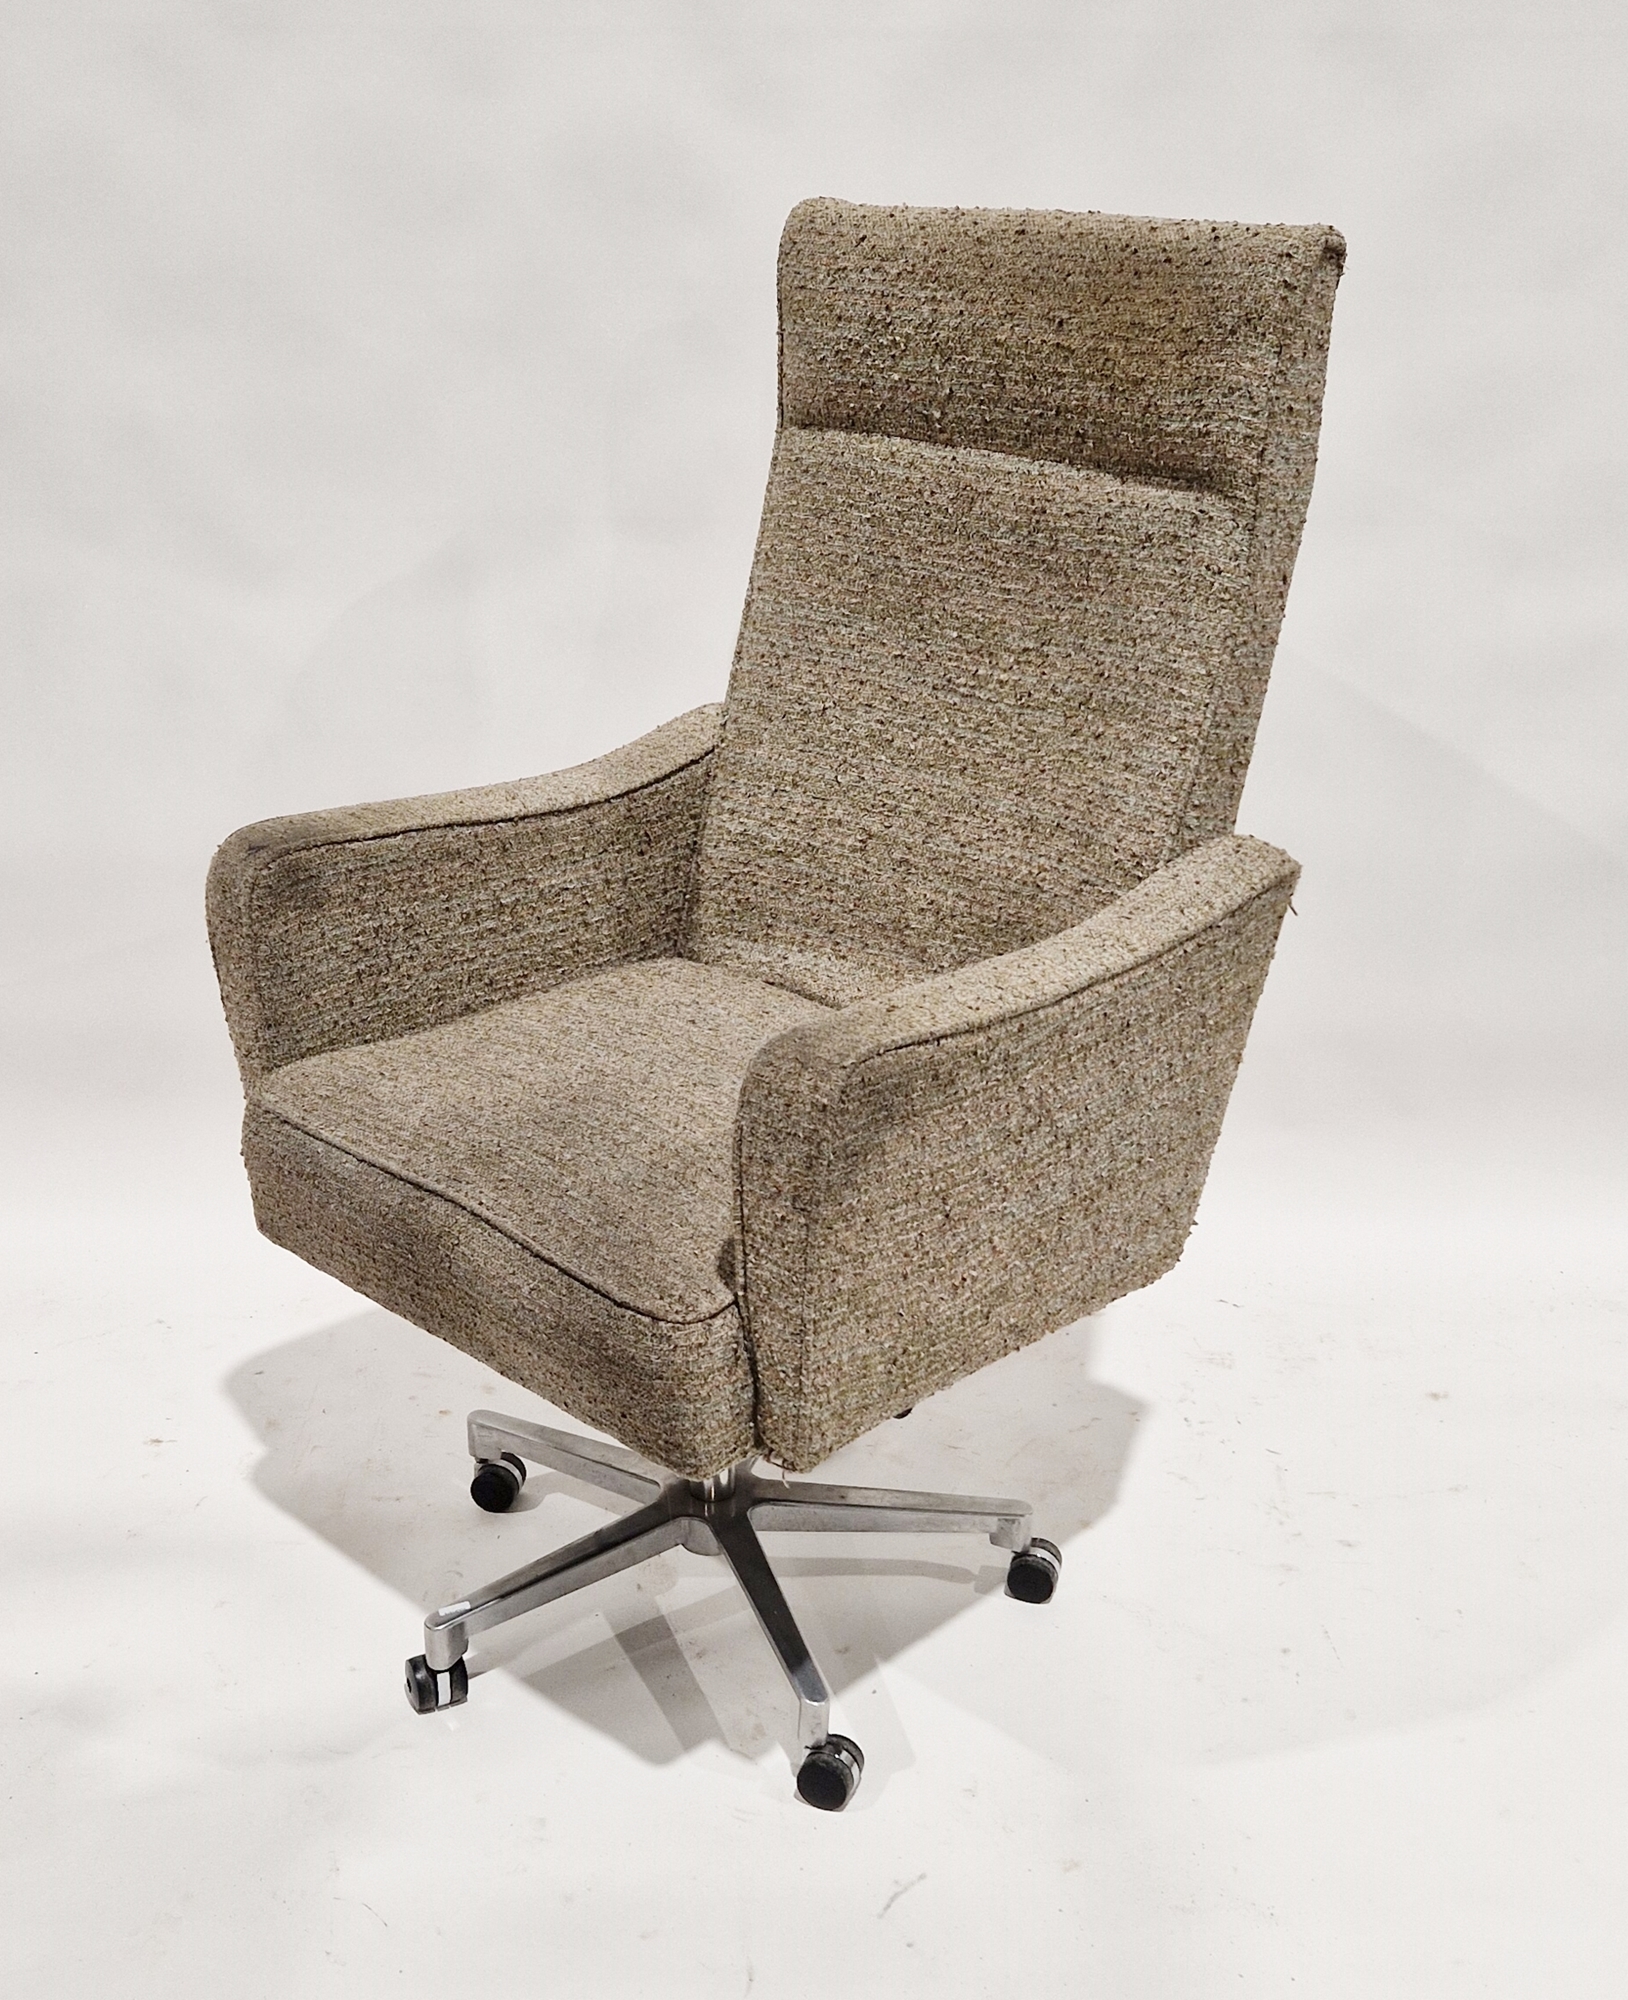 20th century fabric upholstered swivel office chair, possibly by Parker Knoll, on polished metal